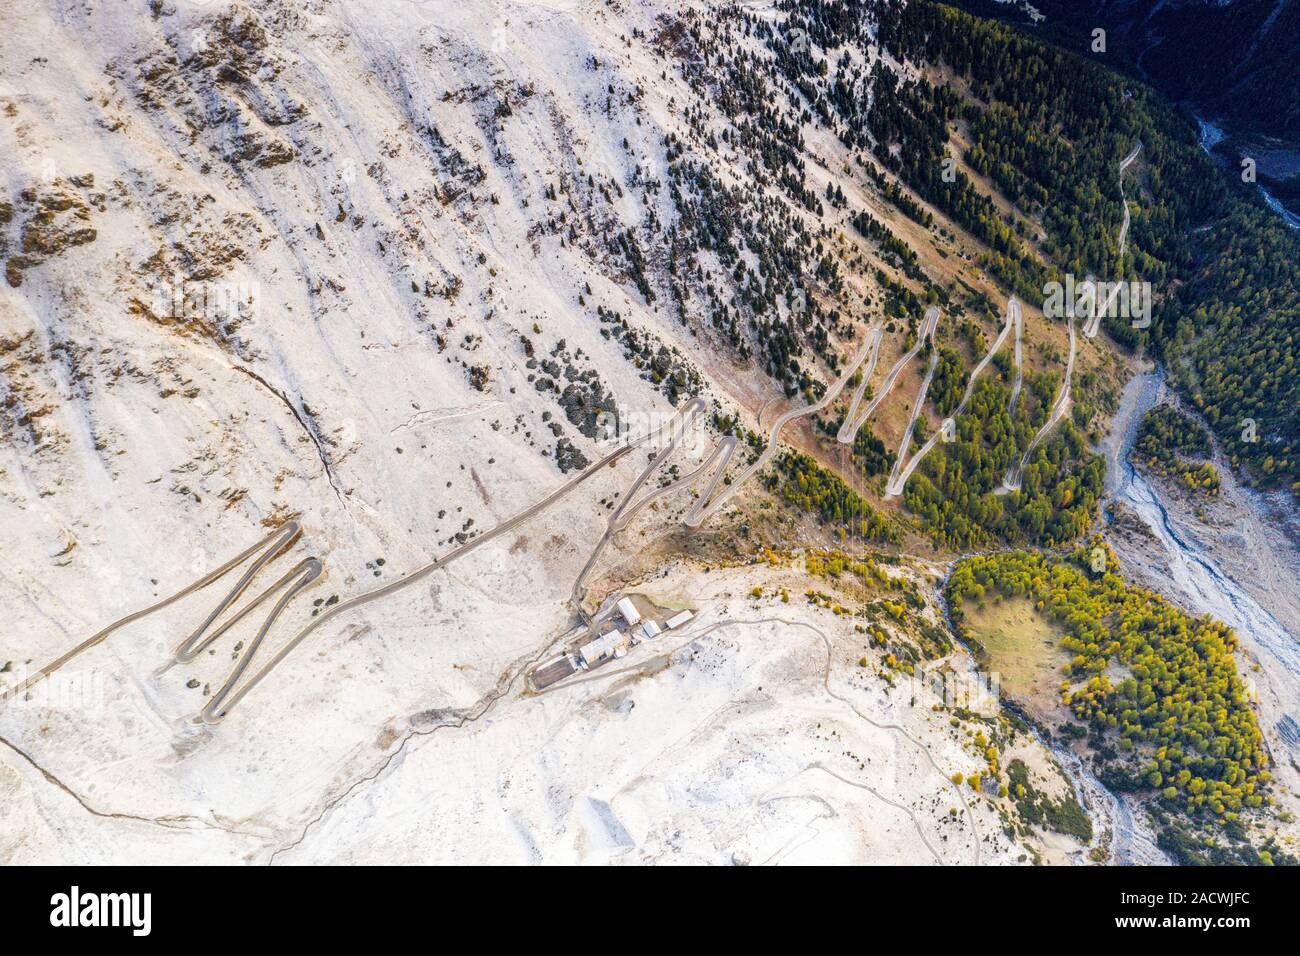 Details of narrow bends of the Stelvio Pass mountain road, aerial view, Bolzano province, South Tyrol side, Italy Stock Photo